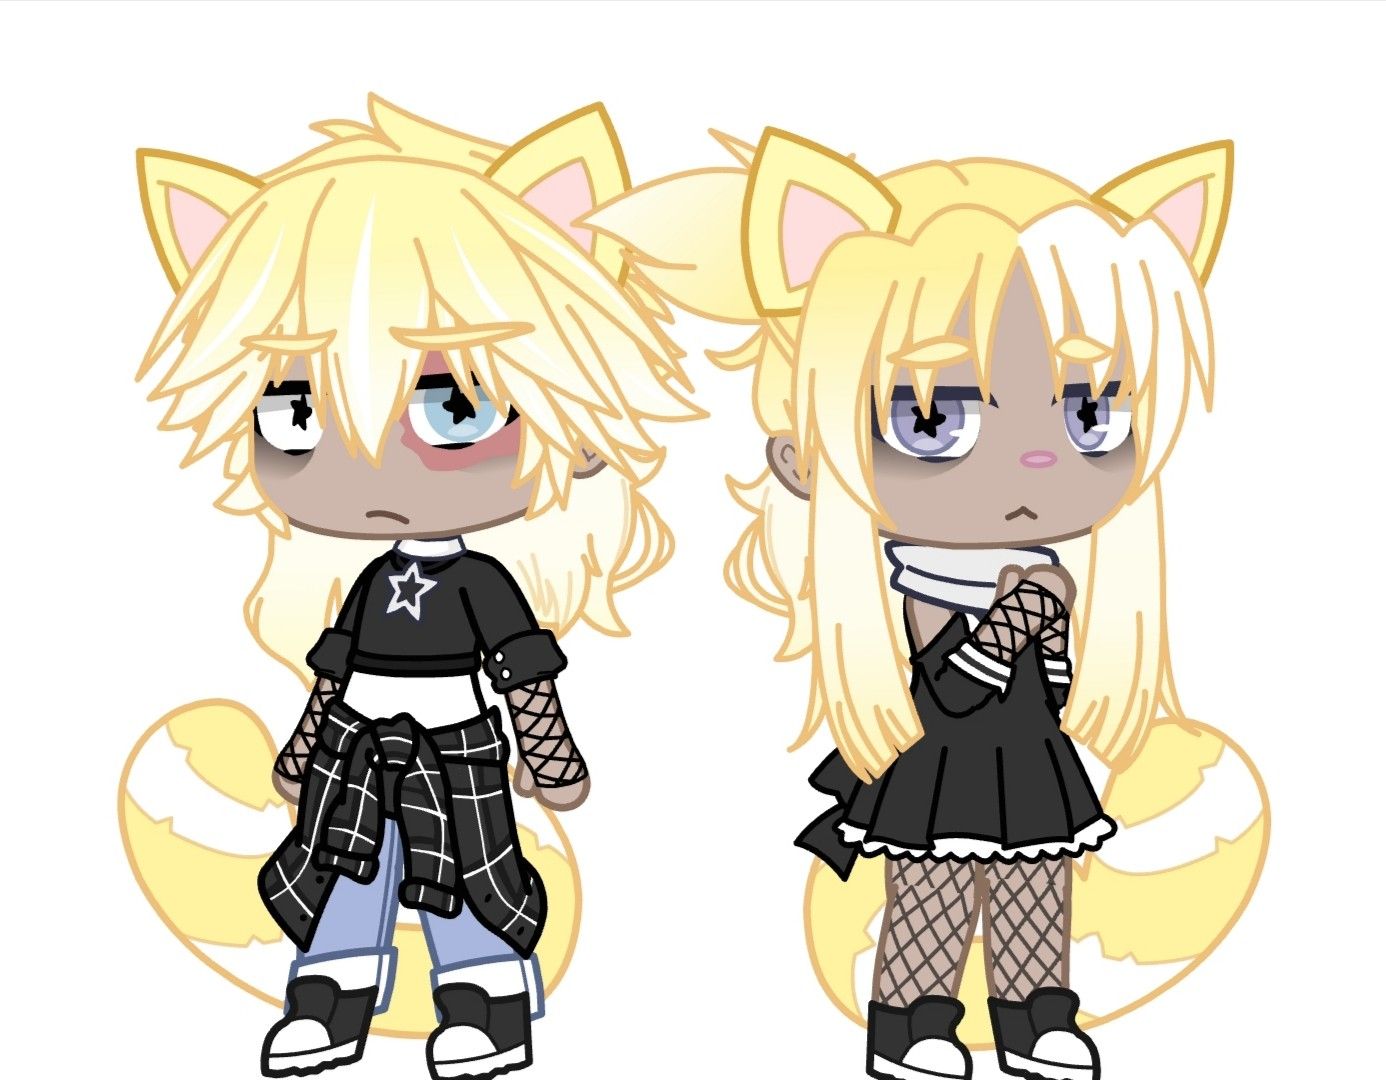 New oc's, the girl is called lemon and the boy Noah- Club outfits, Clothing sketches, Character outfits